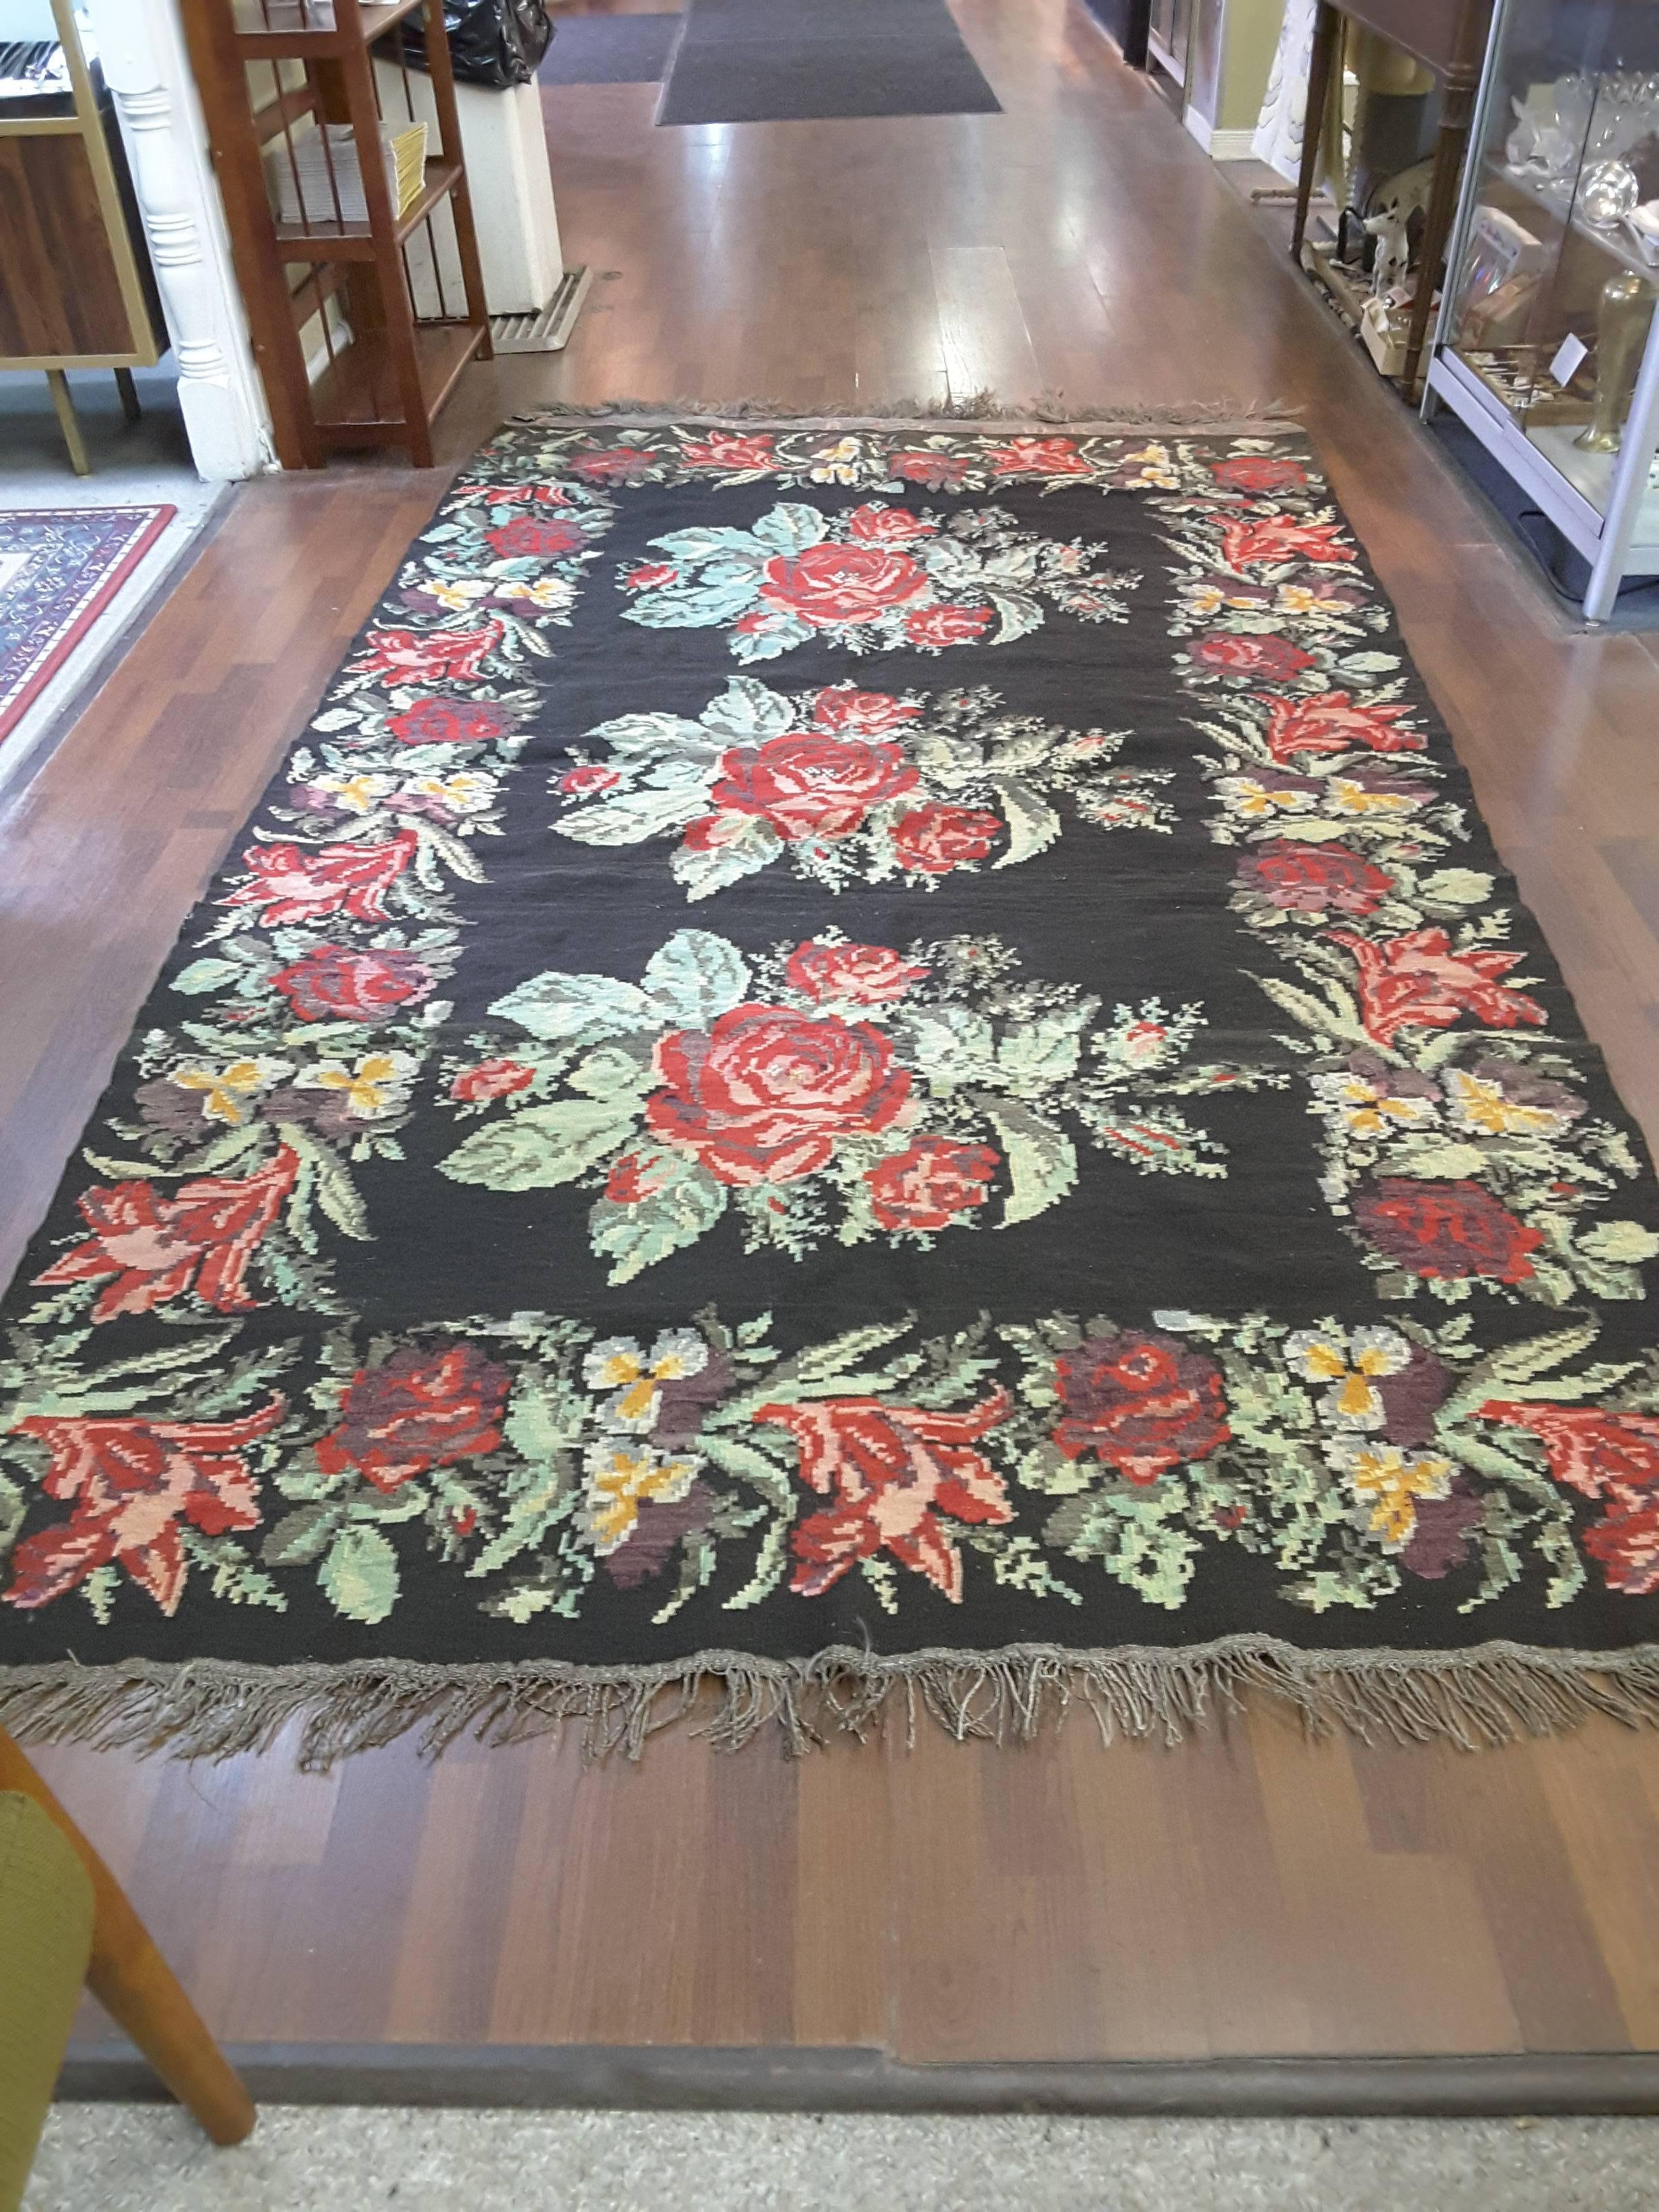 An antique Bessarabian Kilim carpet, floral patterns made in a naturalistic Western style on a black background, inscribed with the weaver's name and dated. In excellent condition, made in Romania, circa 1900. The size is approximately 114